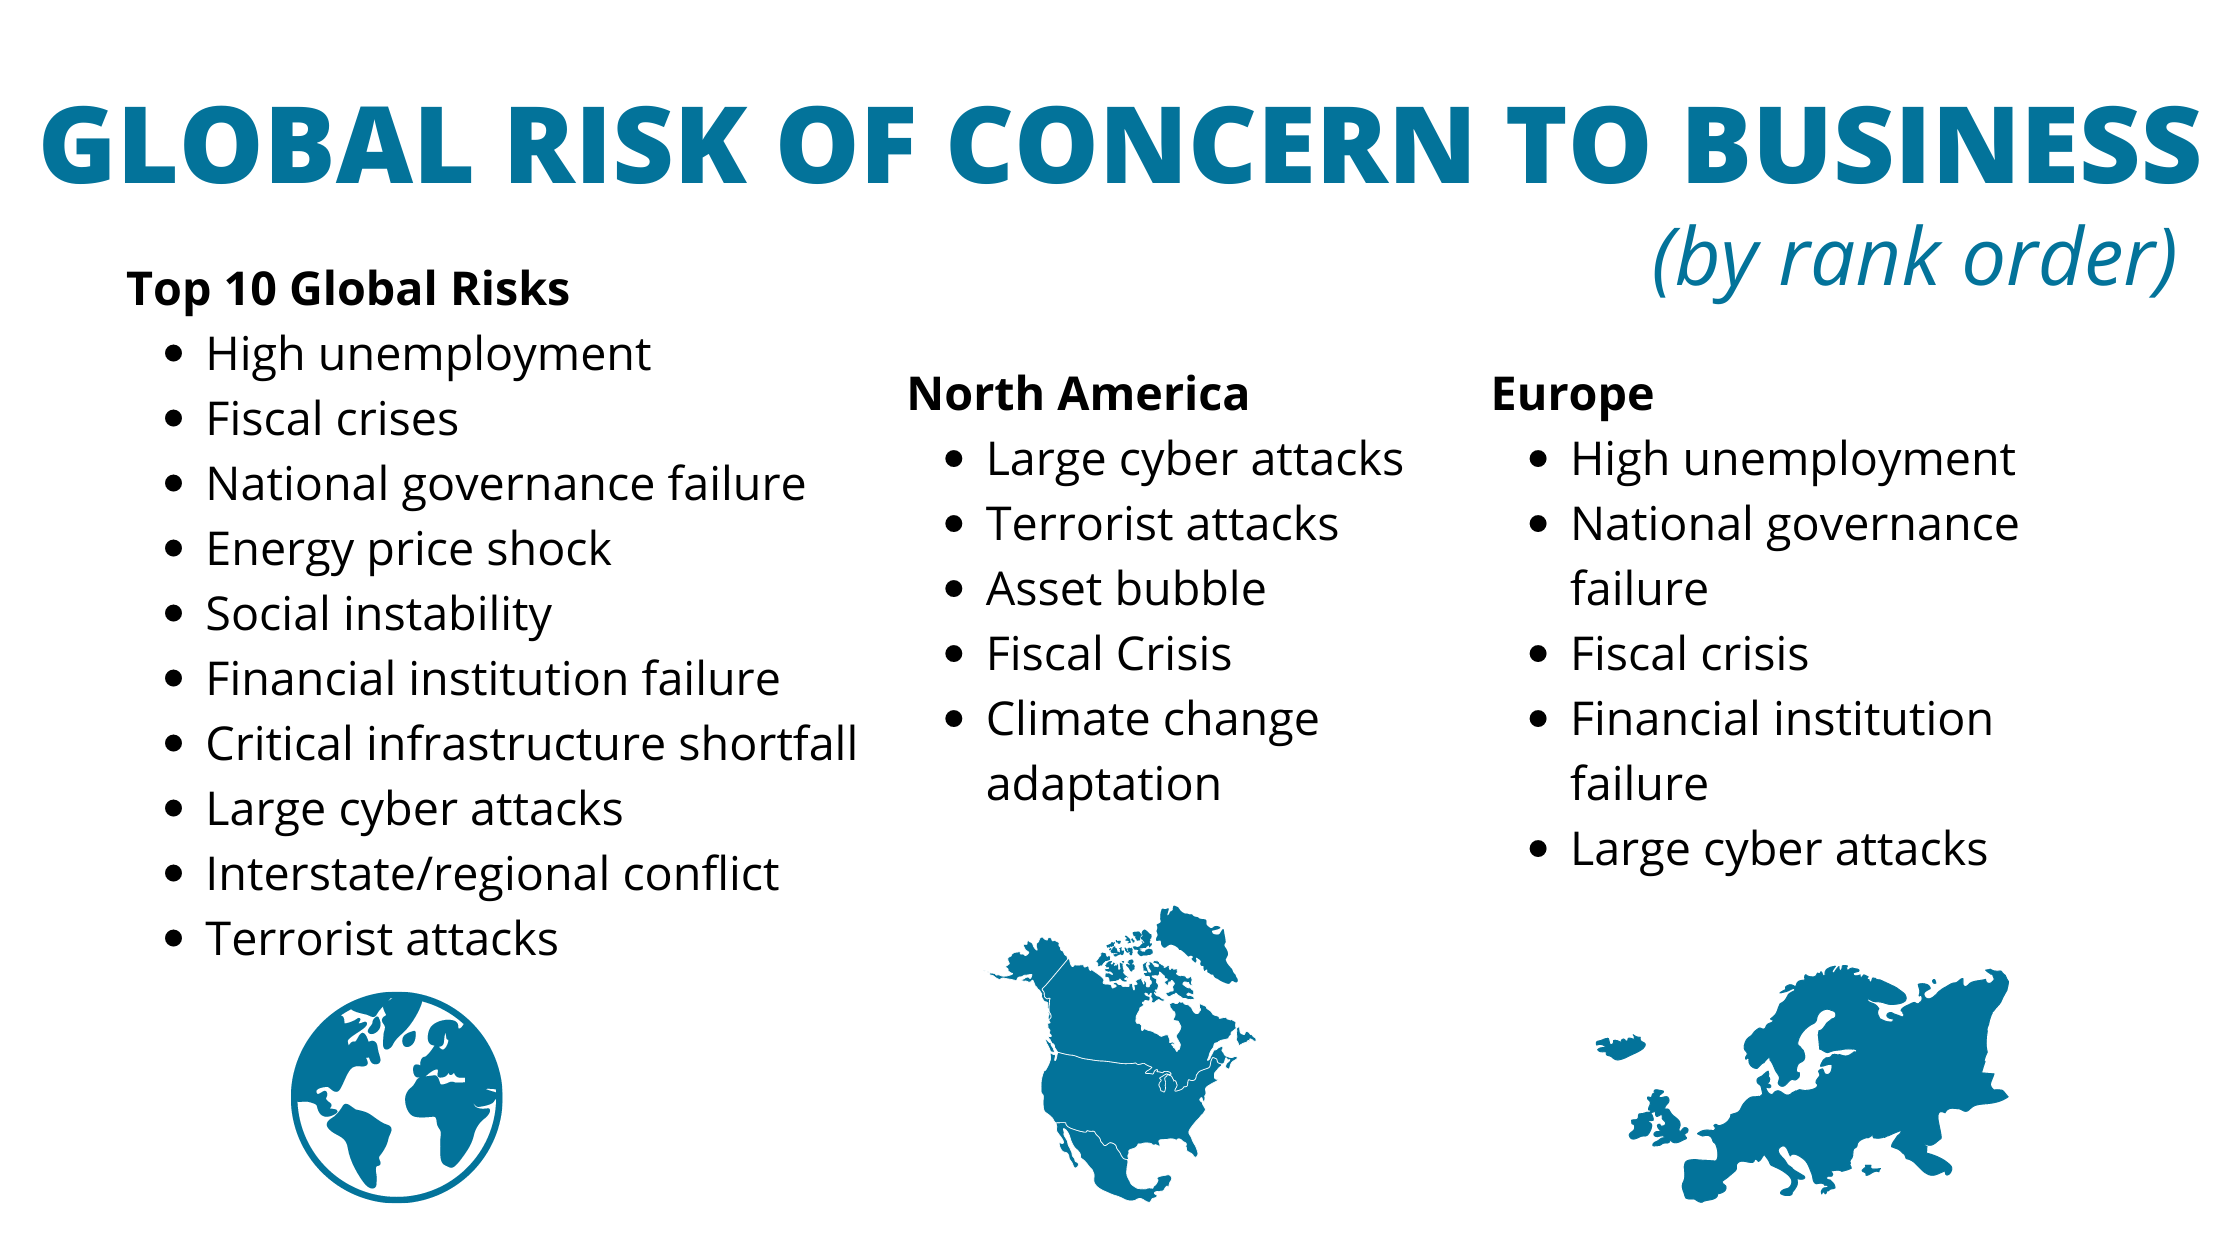 GLOBAL RISK OF CONCERN TO BUSINESS